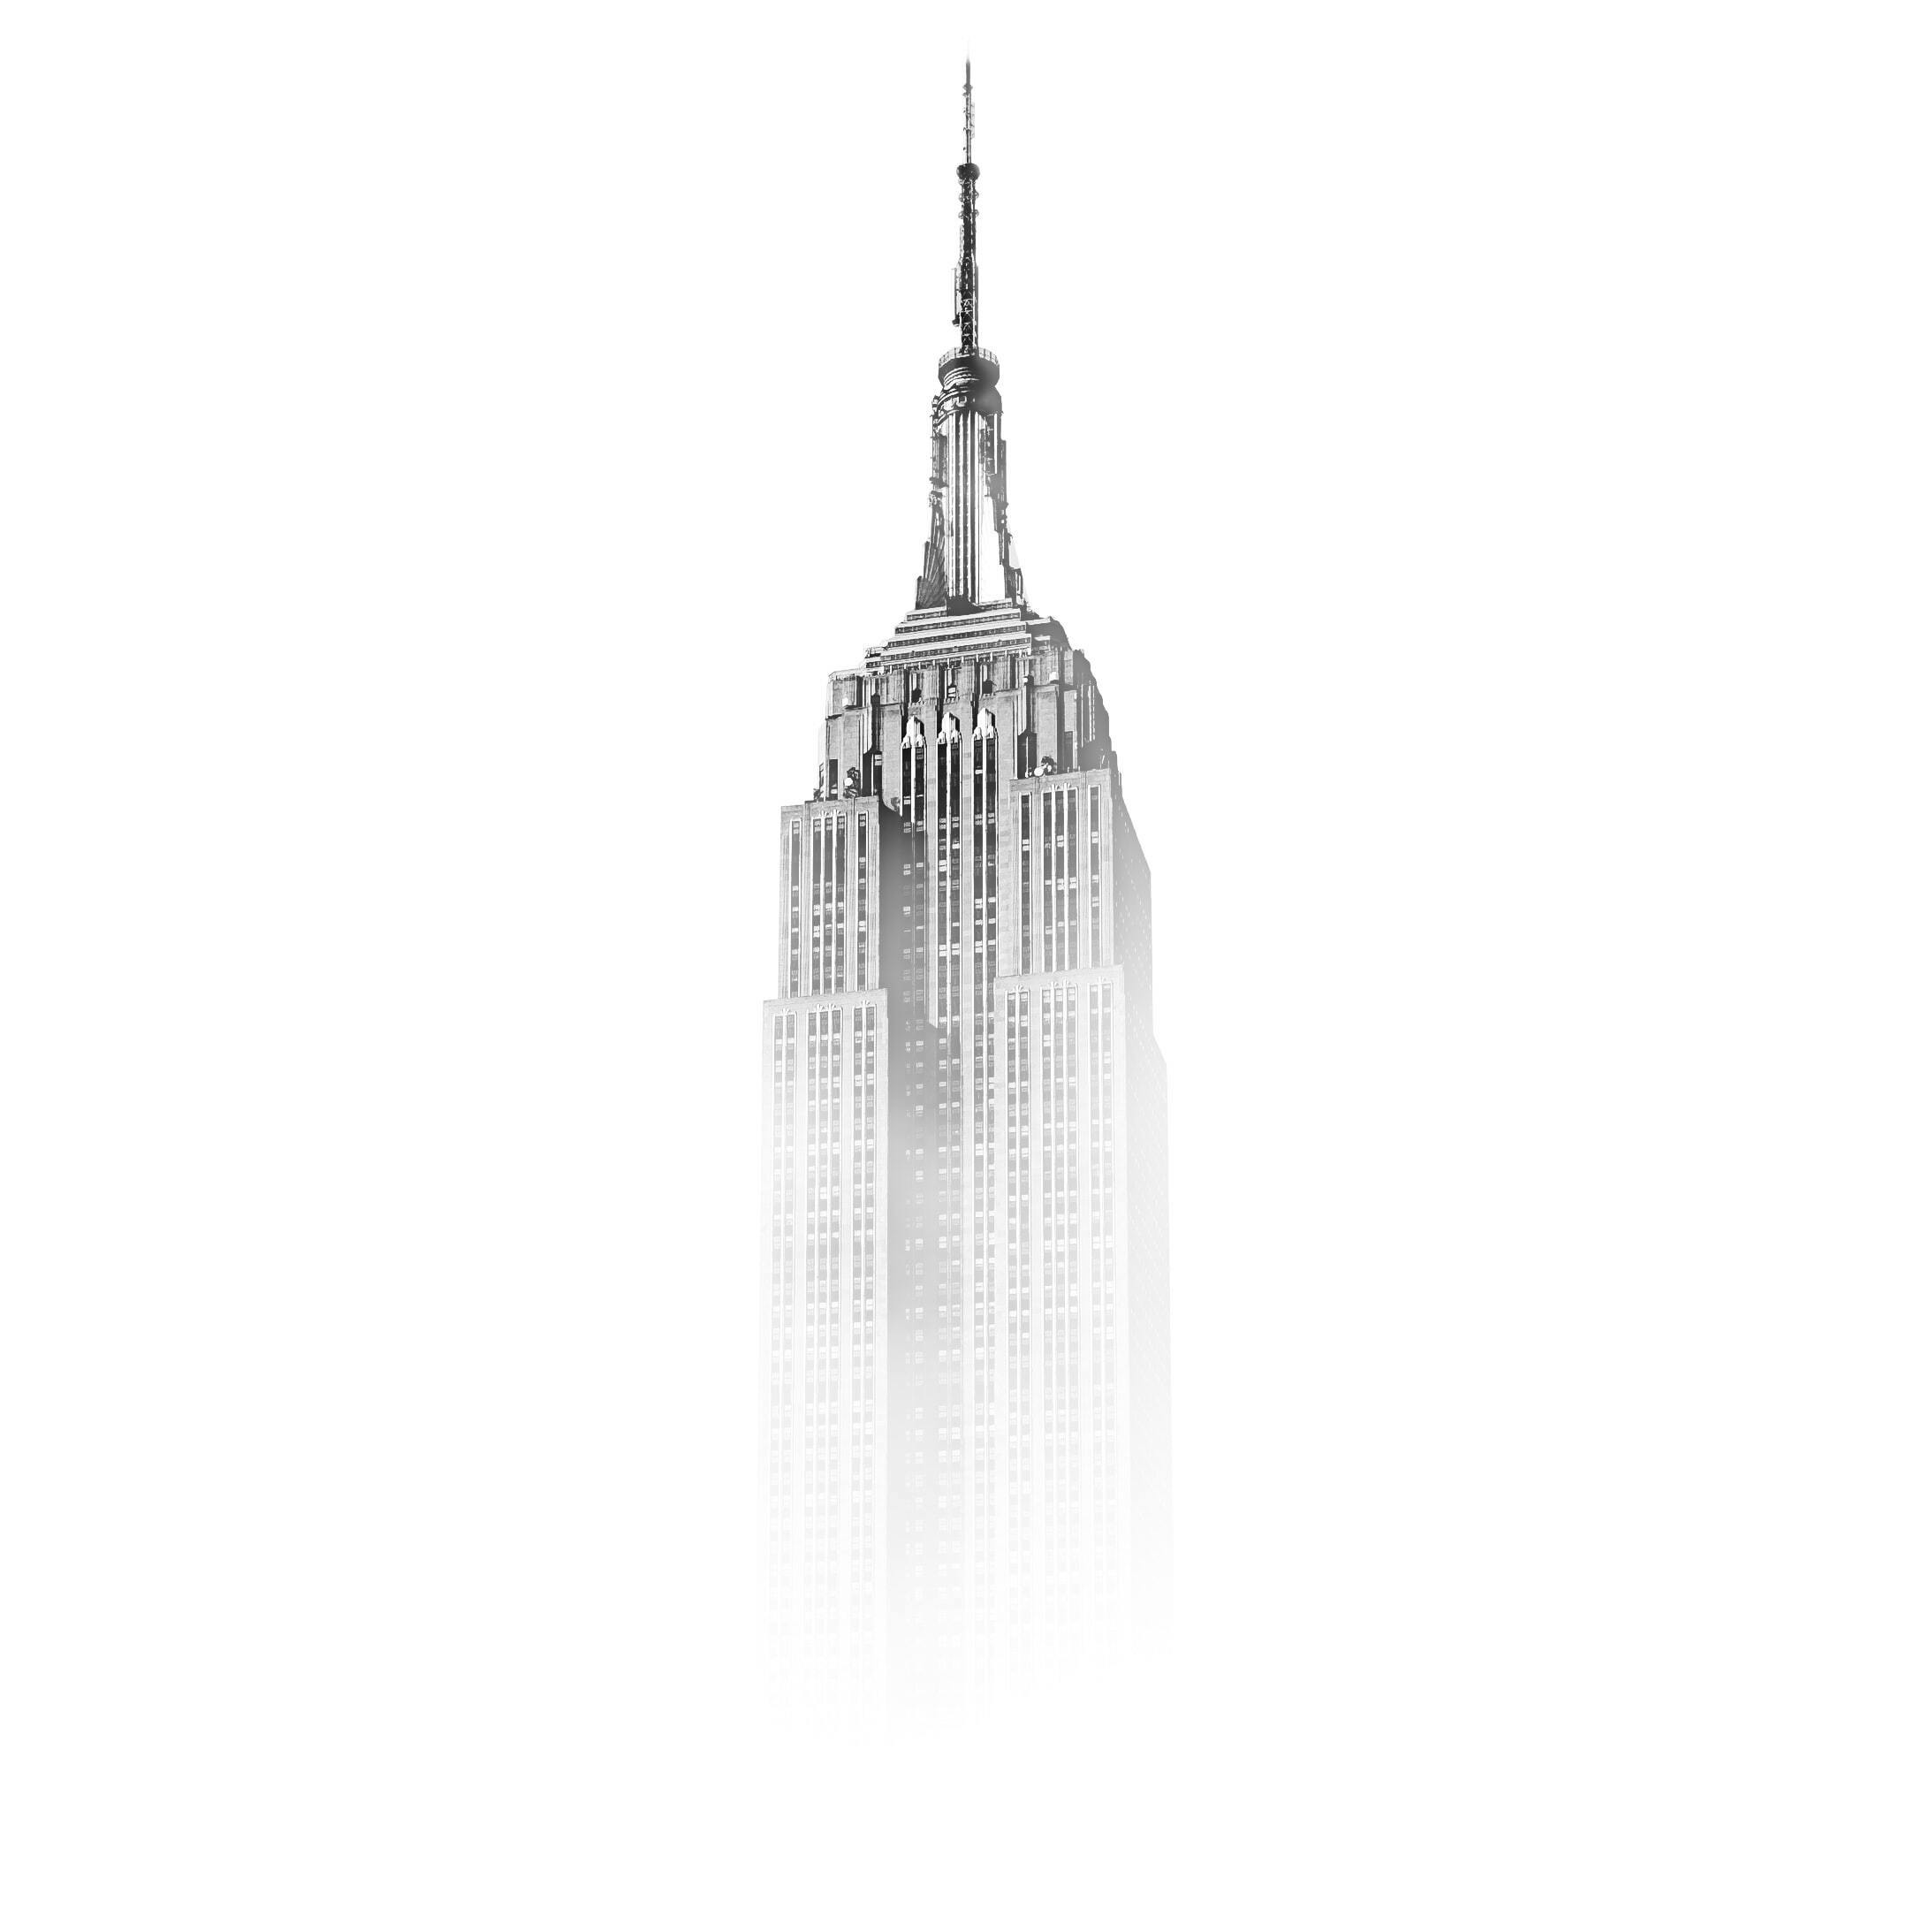 photoshopped empire state building